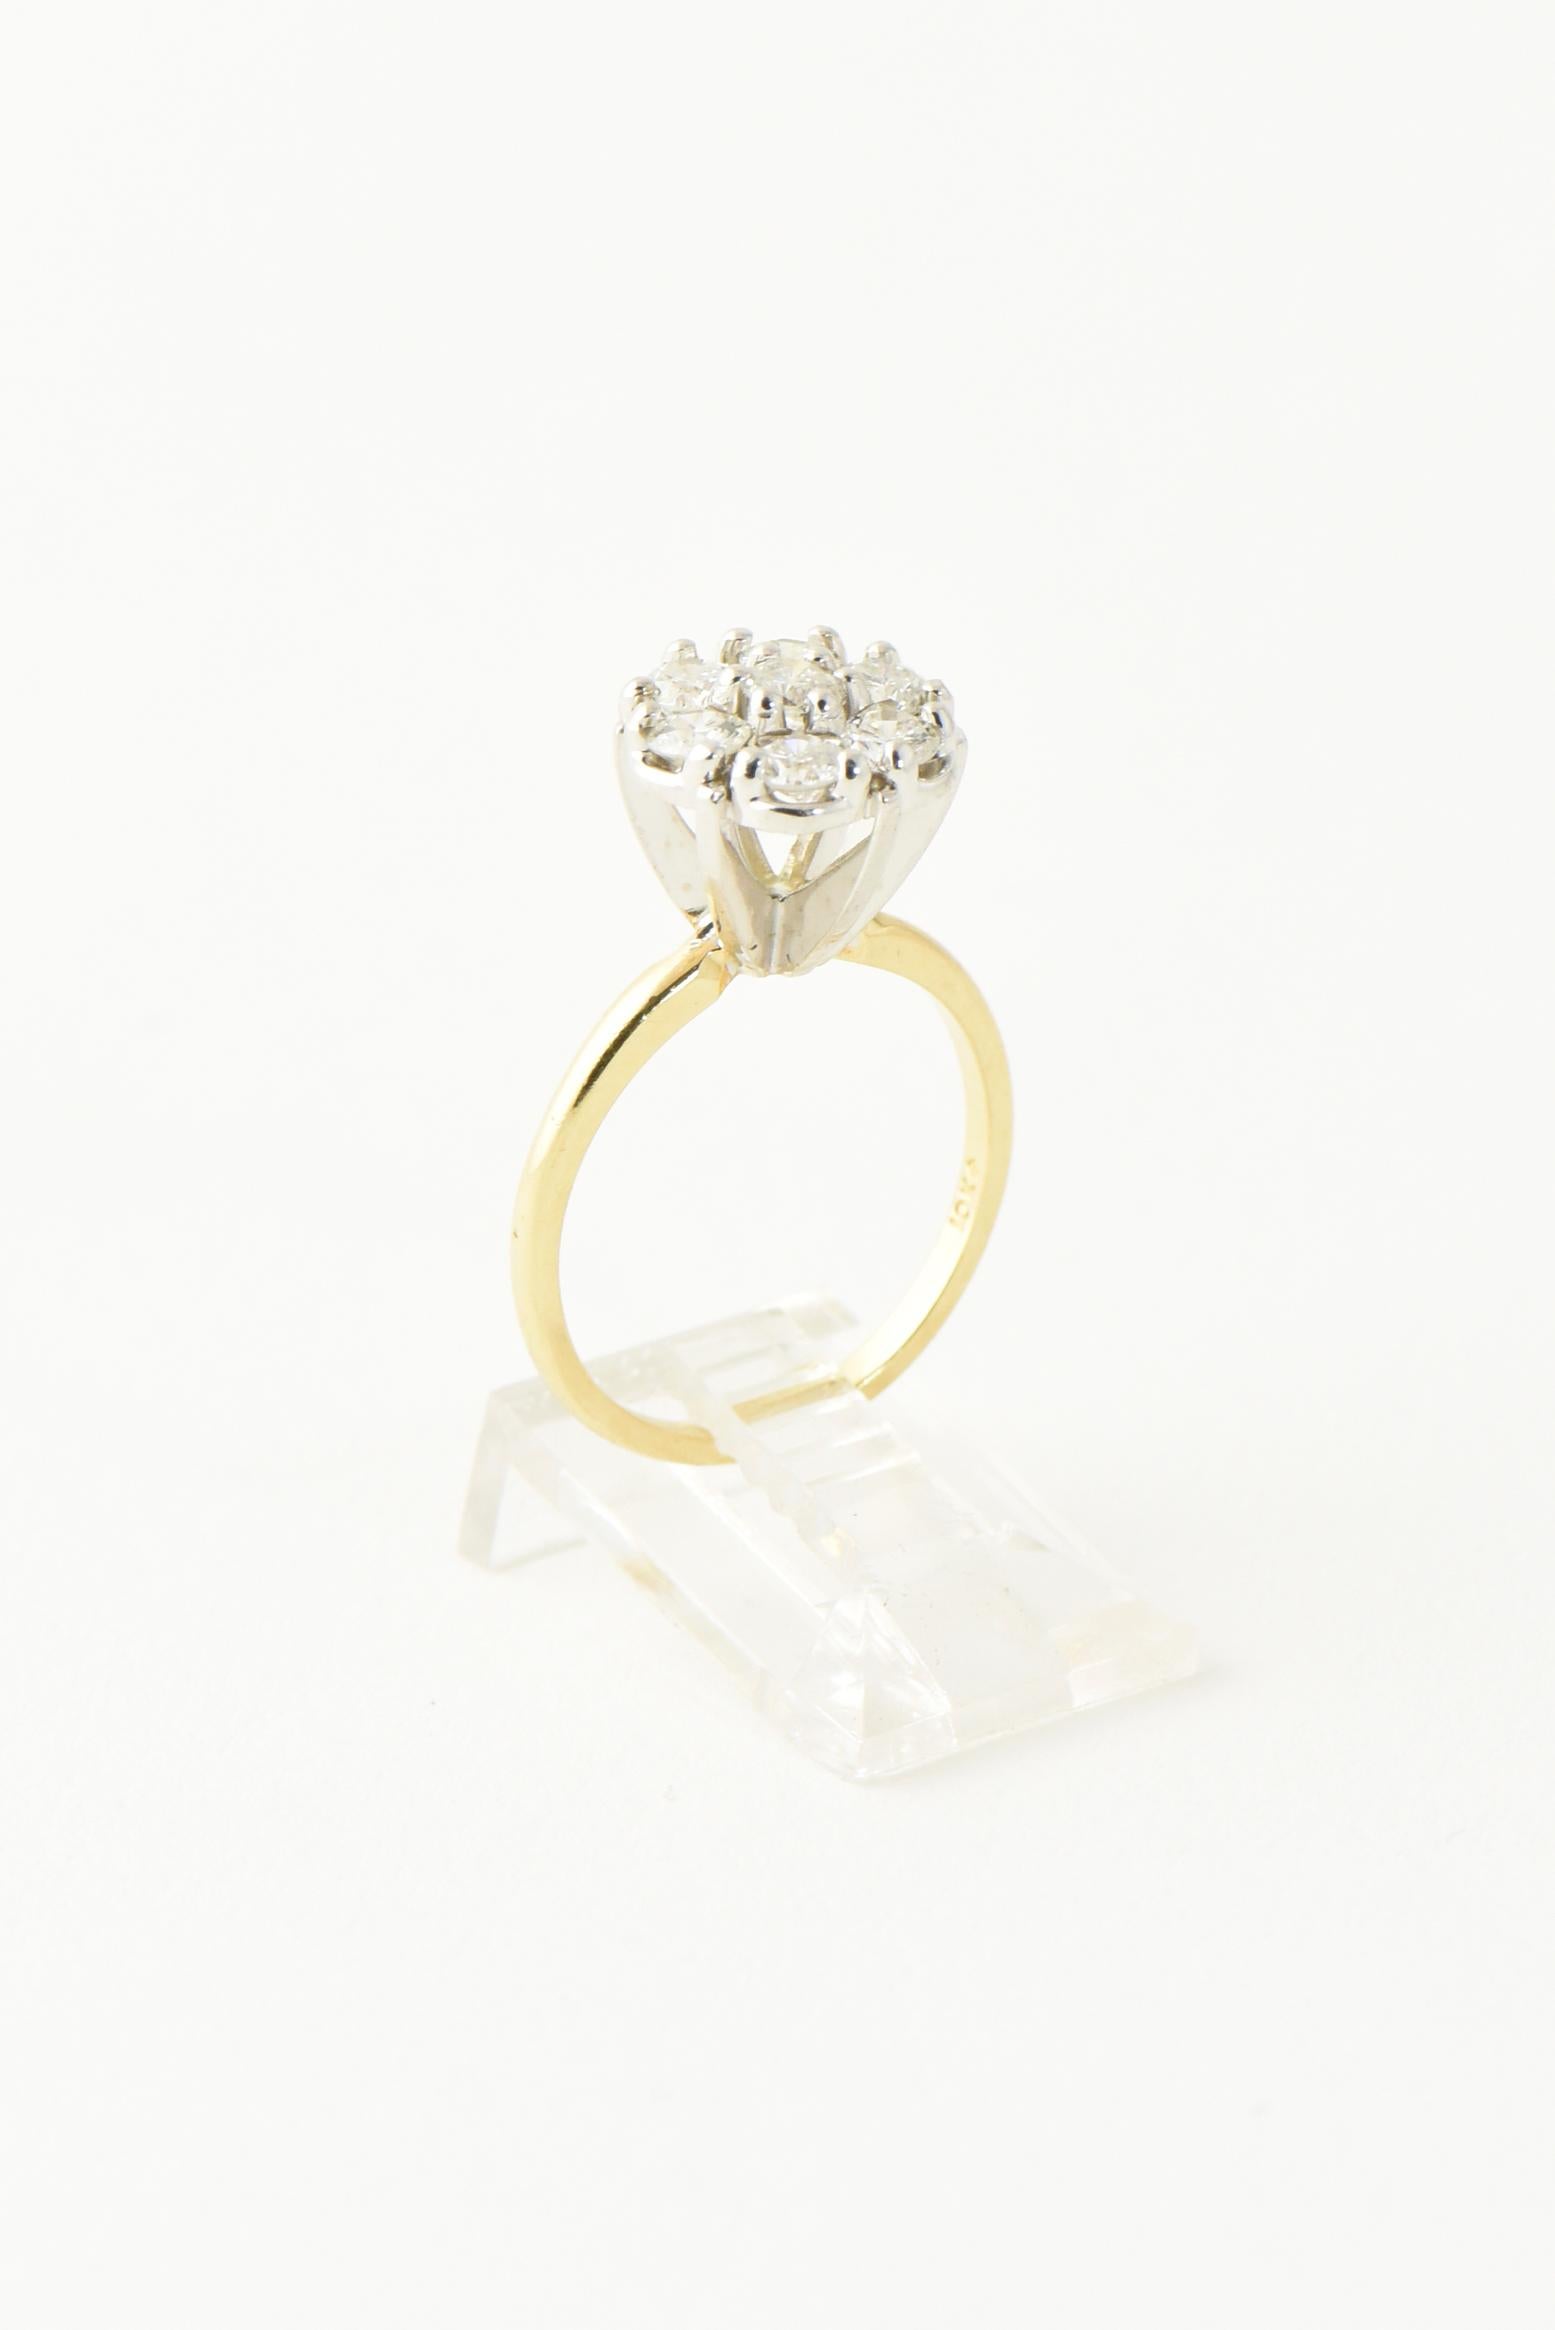 flower ring with diamond in the middle